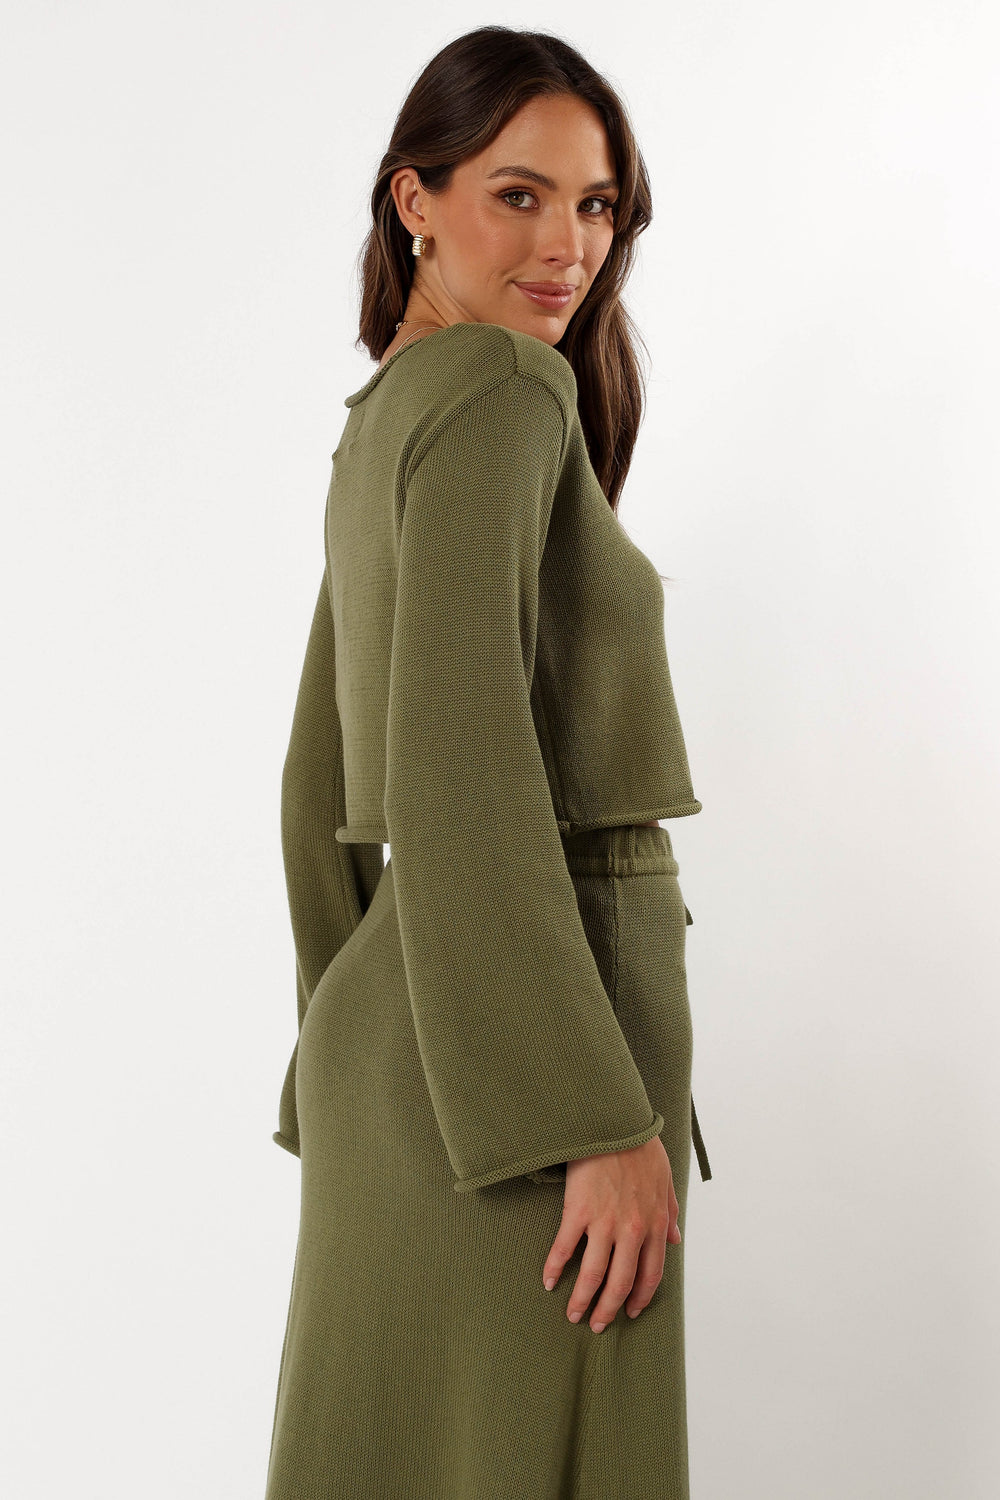 TOPS Rooney Knit Jumper - Olive (Hold for Cool Beginnings)